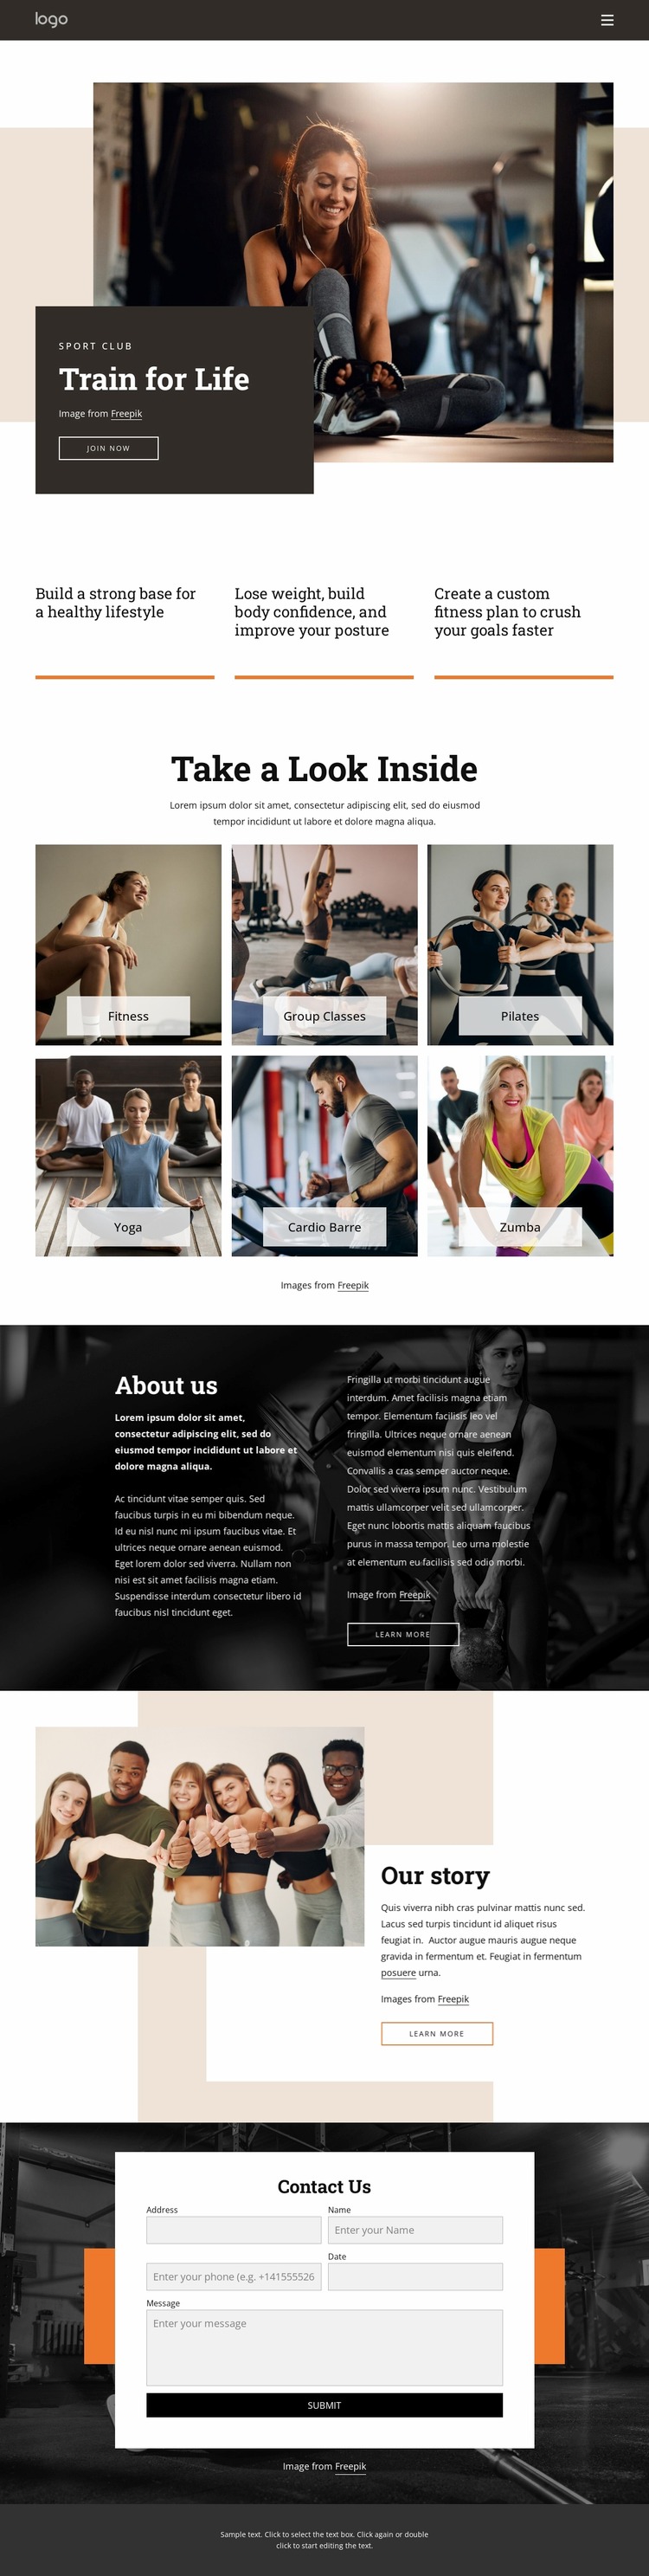 Get moving with our range of classes WordPress Website Builder